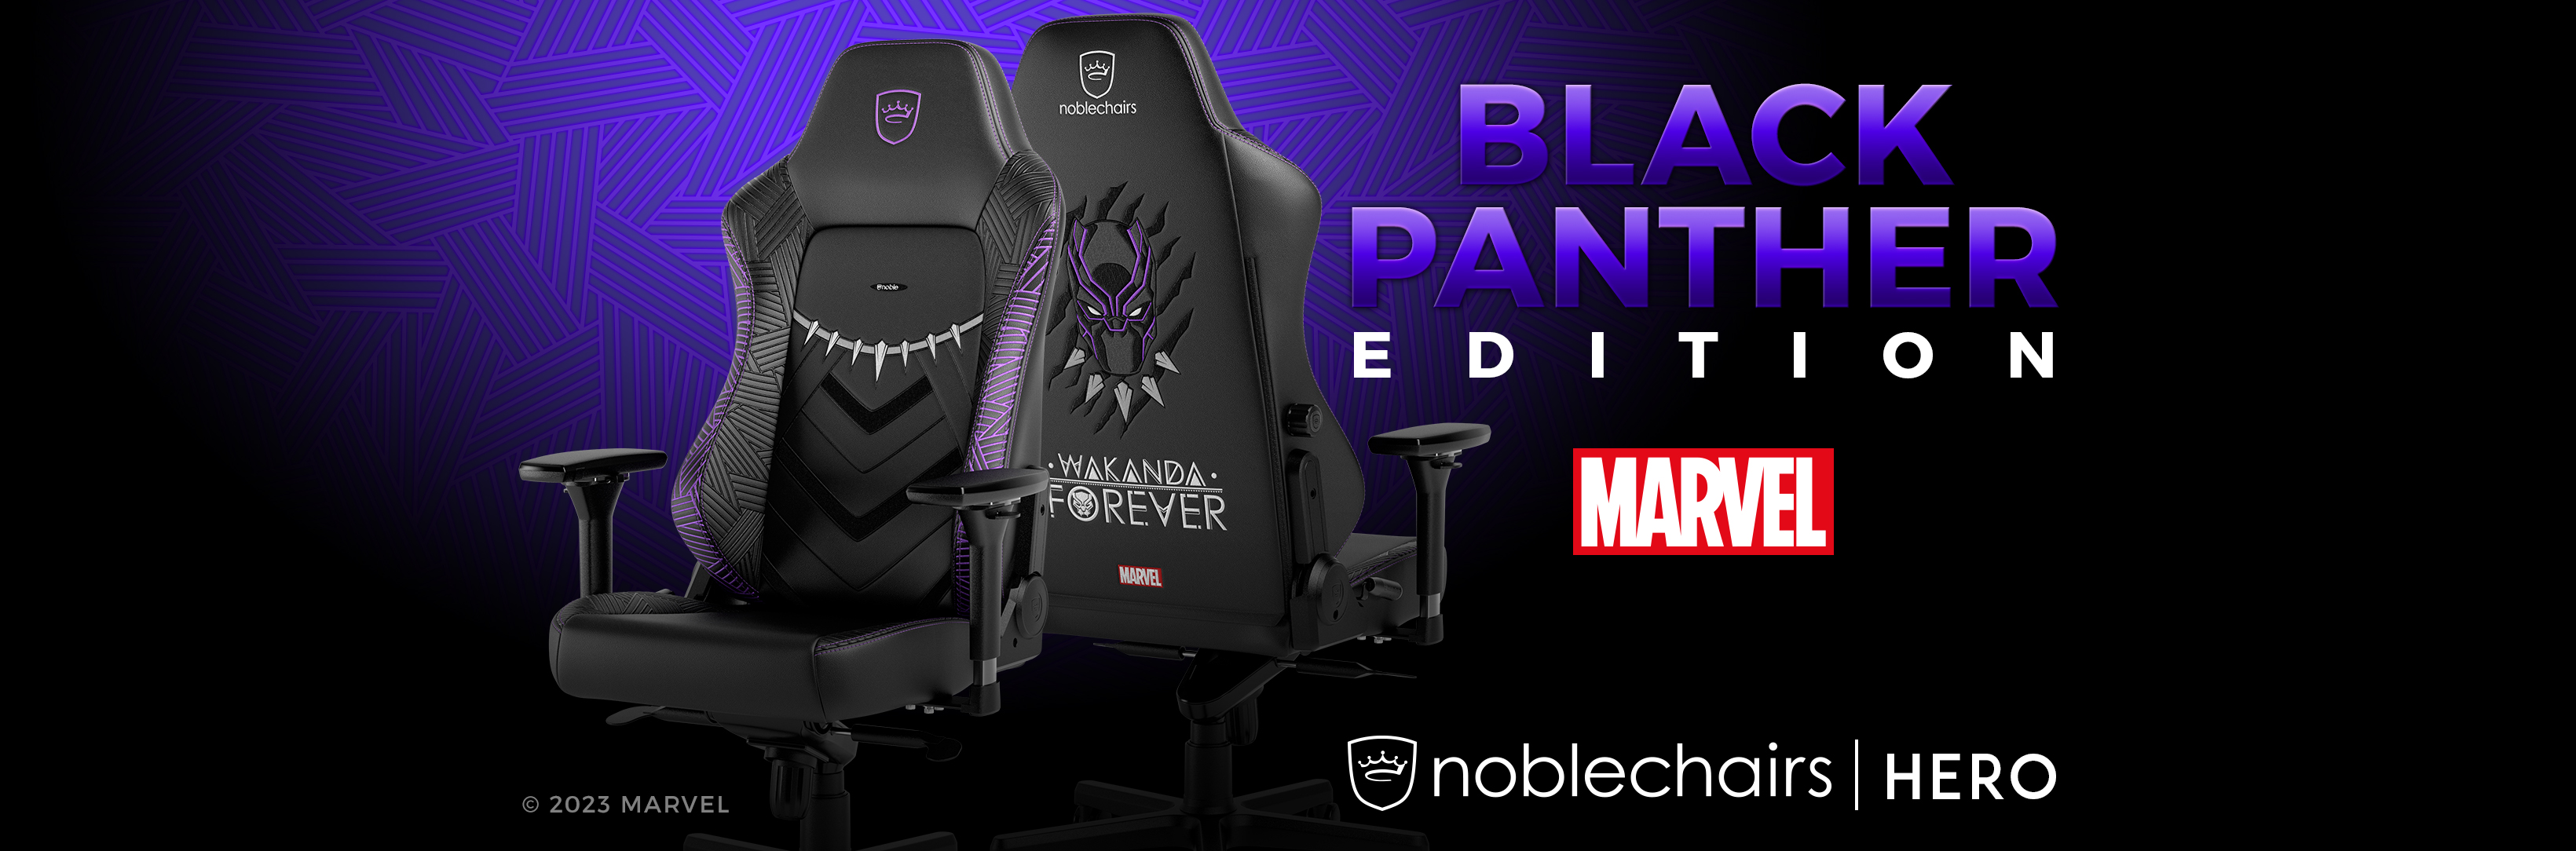 noblechairs HERO Black Panther